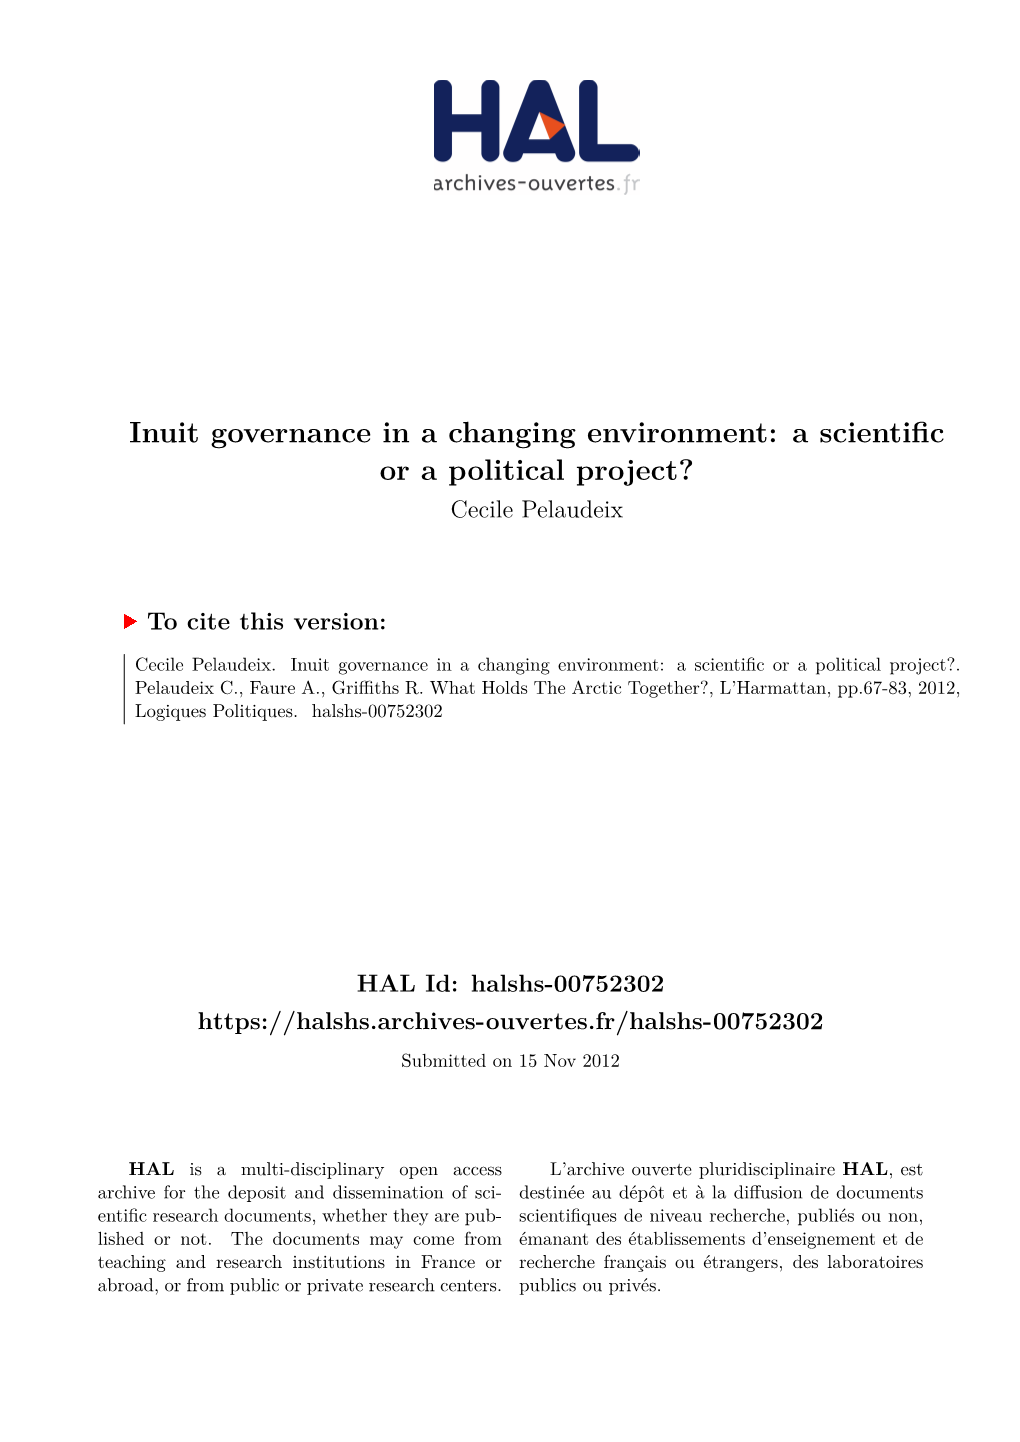 Inuit Governance in a Changing Environment: a Scientific Or a Political Project? Cecile Pelaudeix